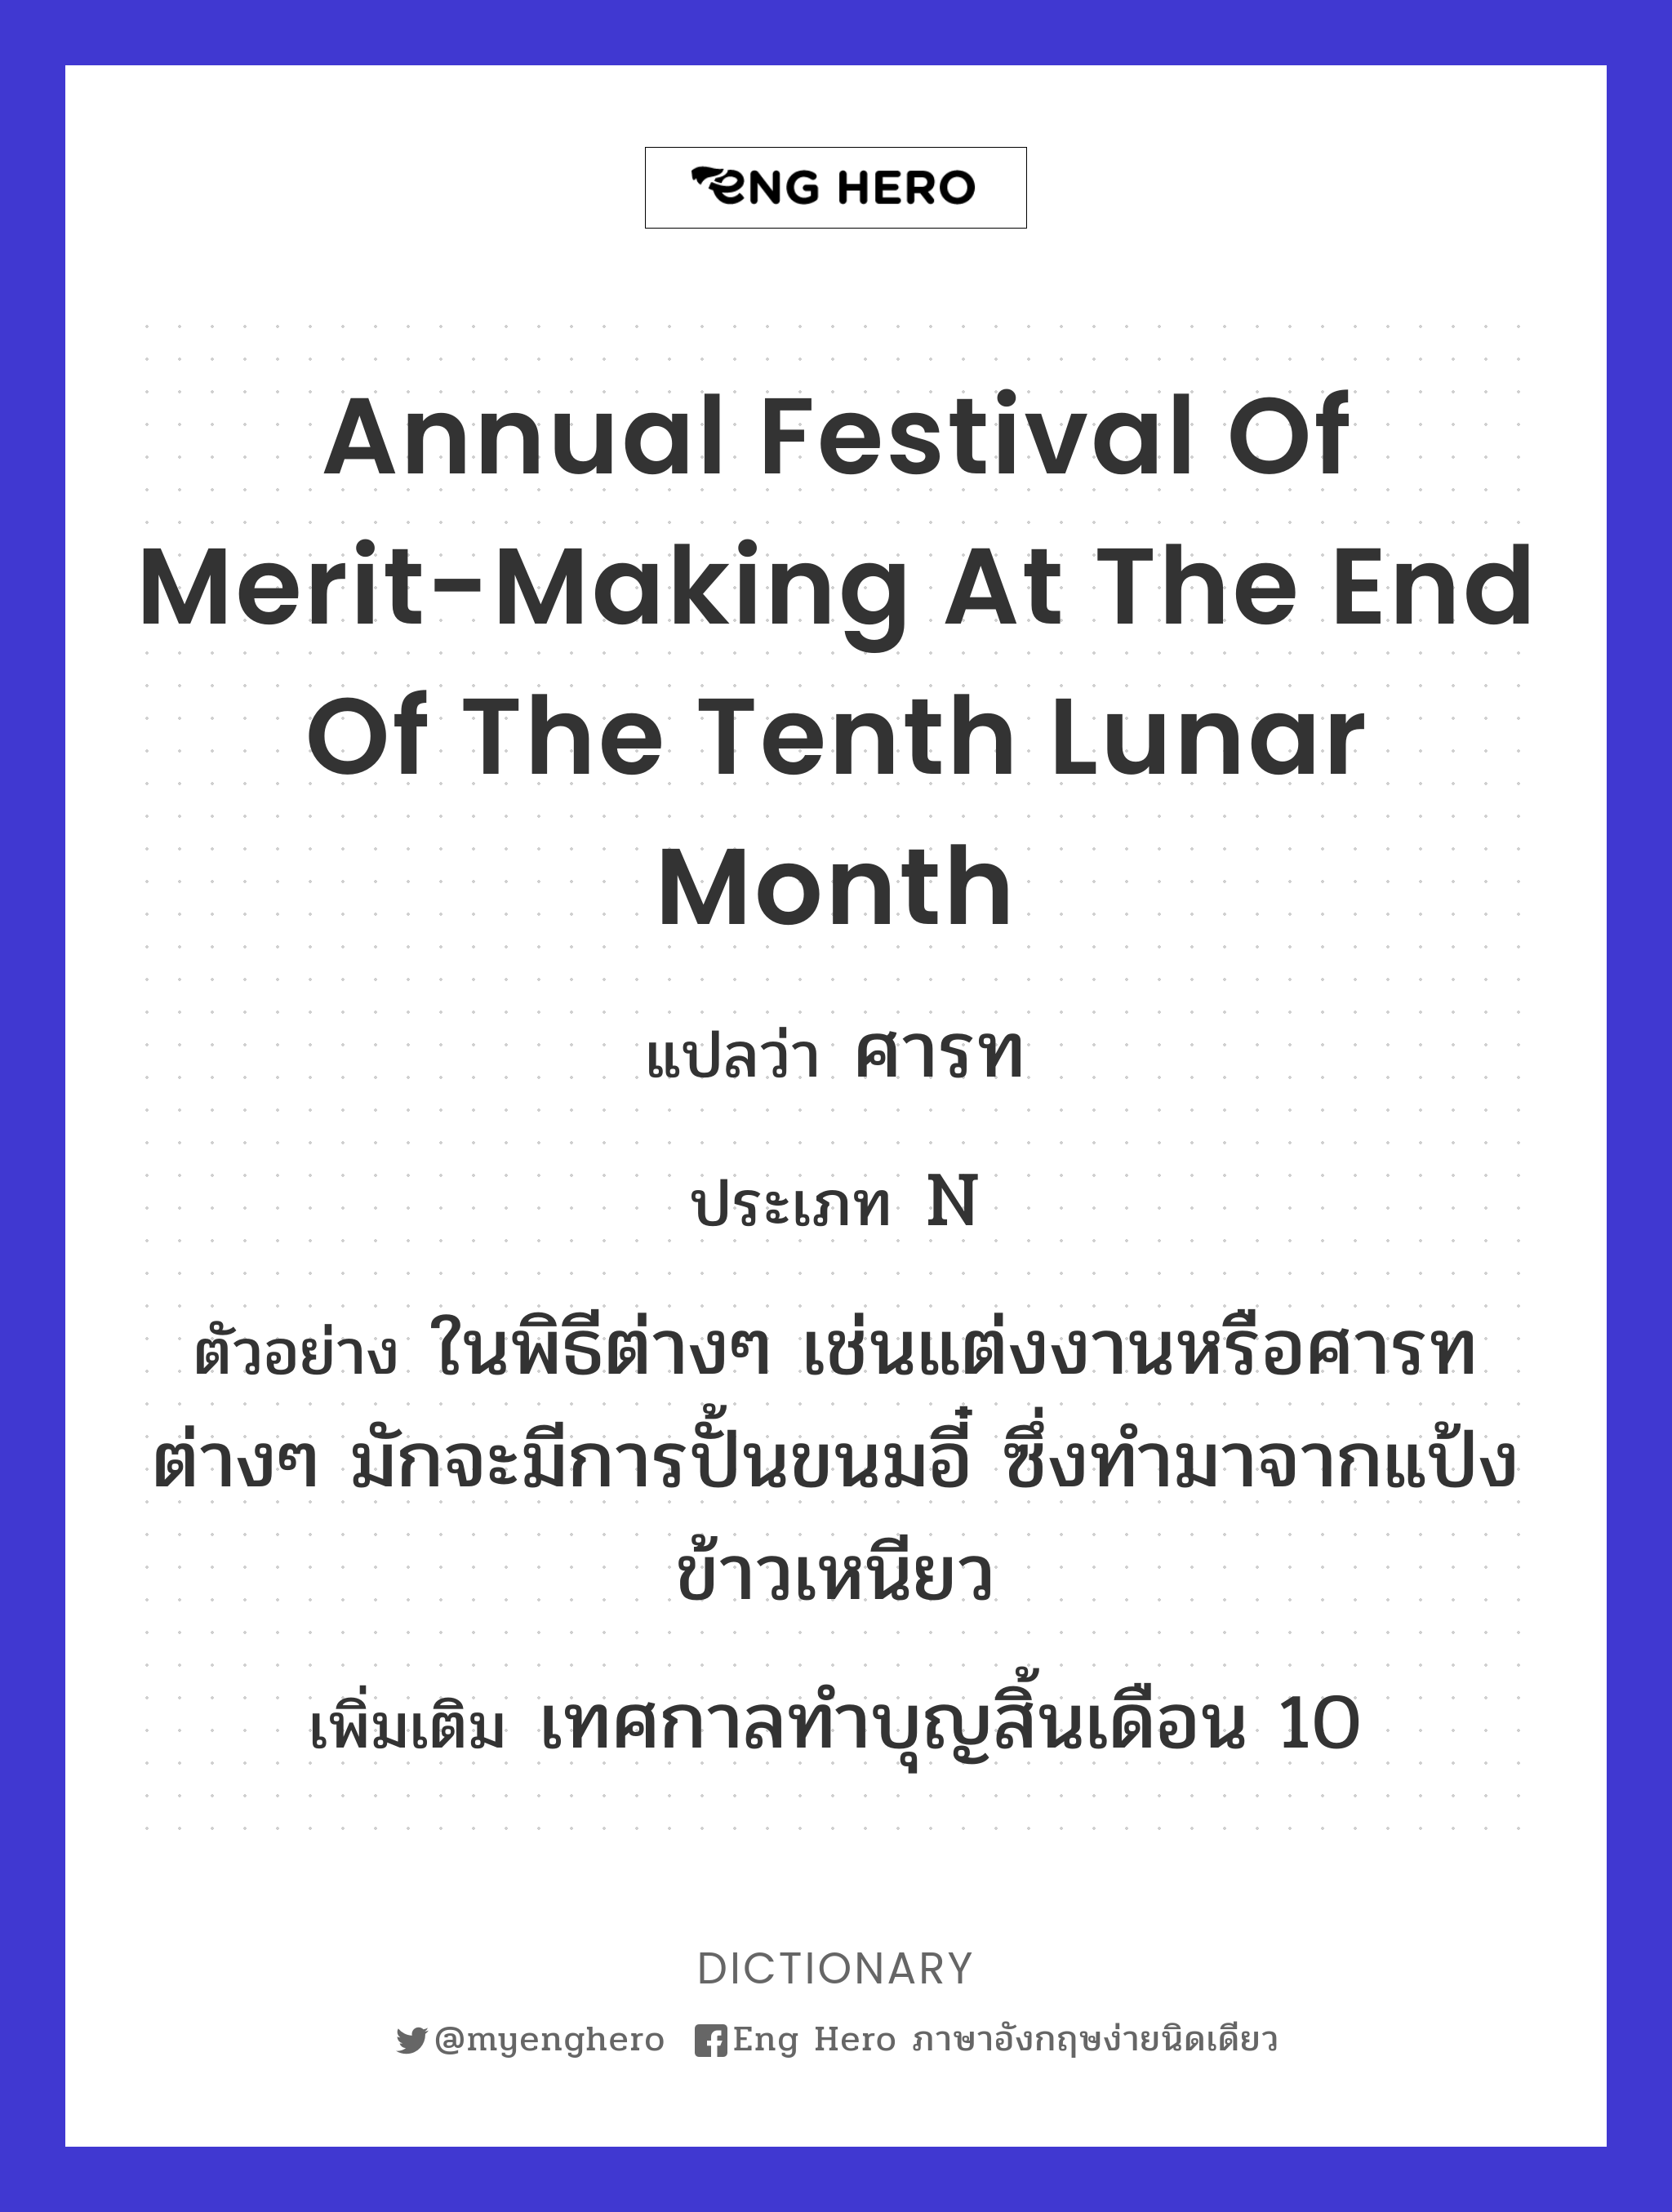 annual festival of merit-making at the end of the tenth lunar month